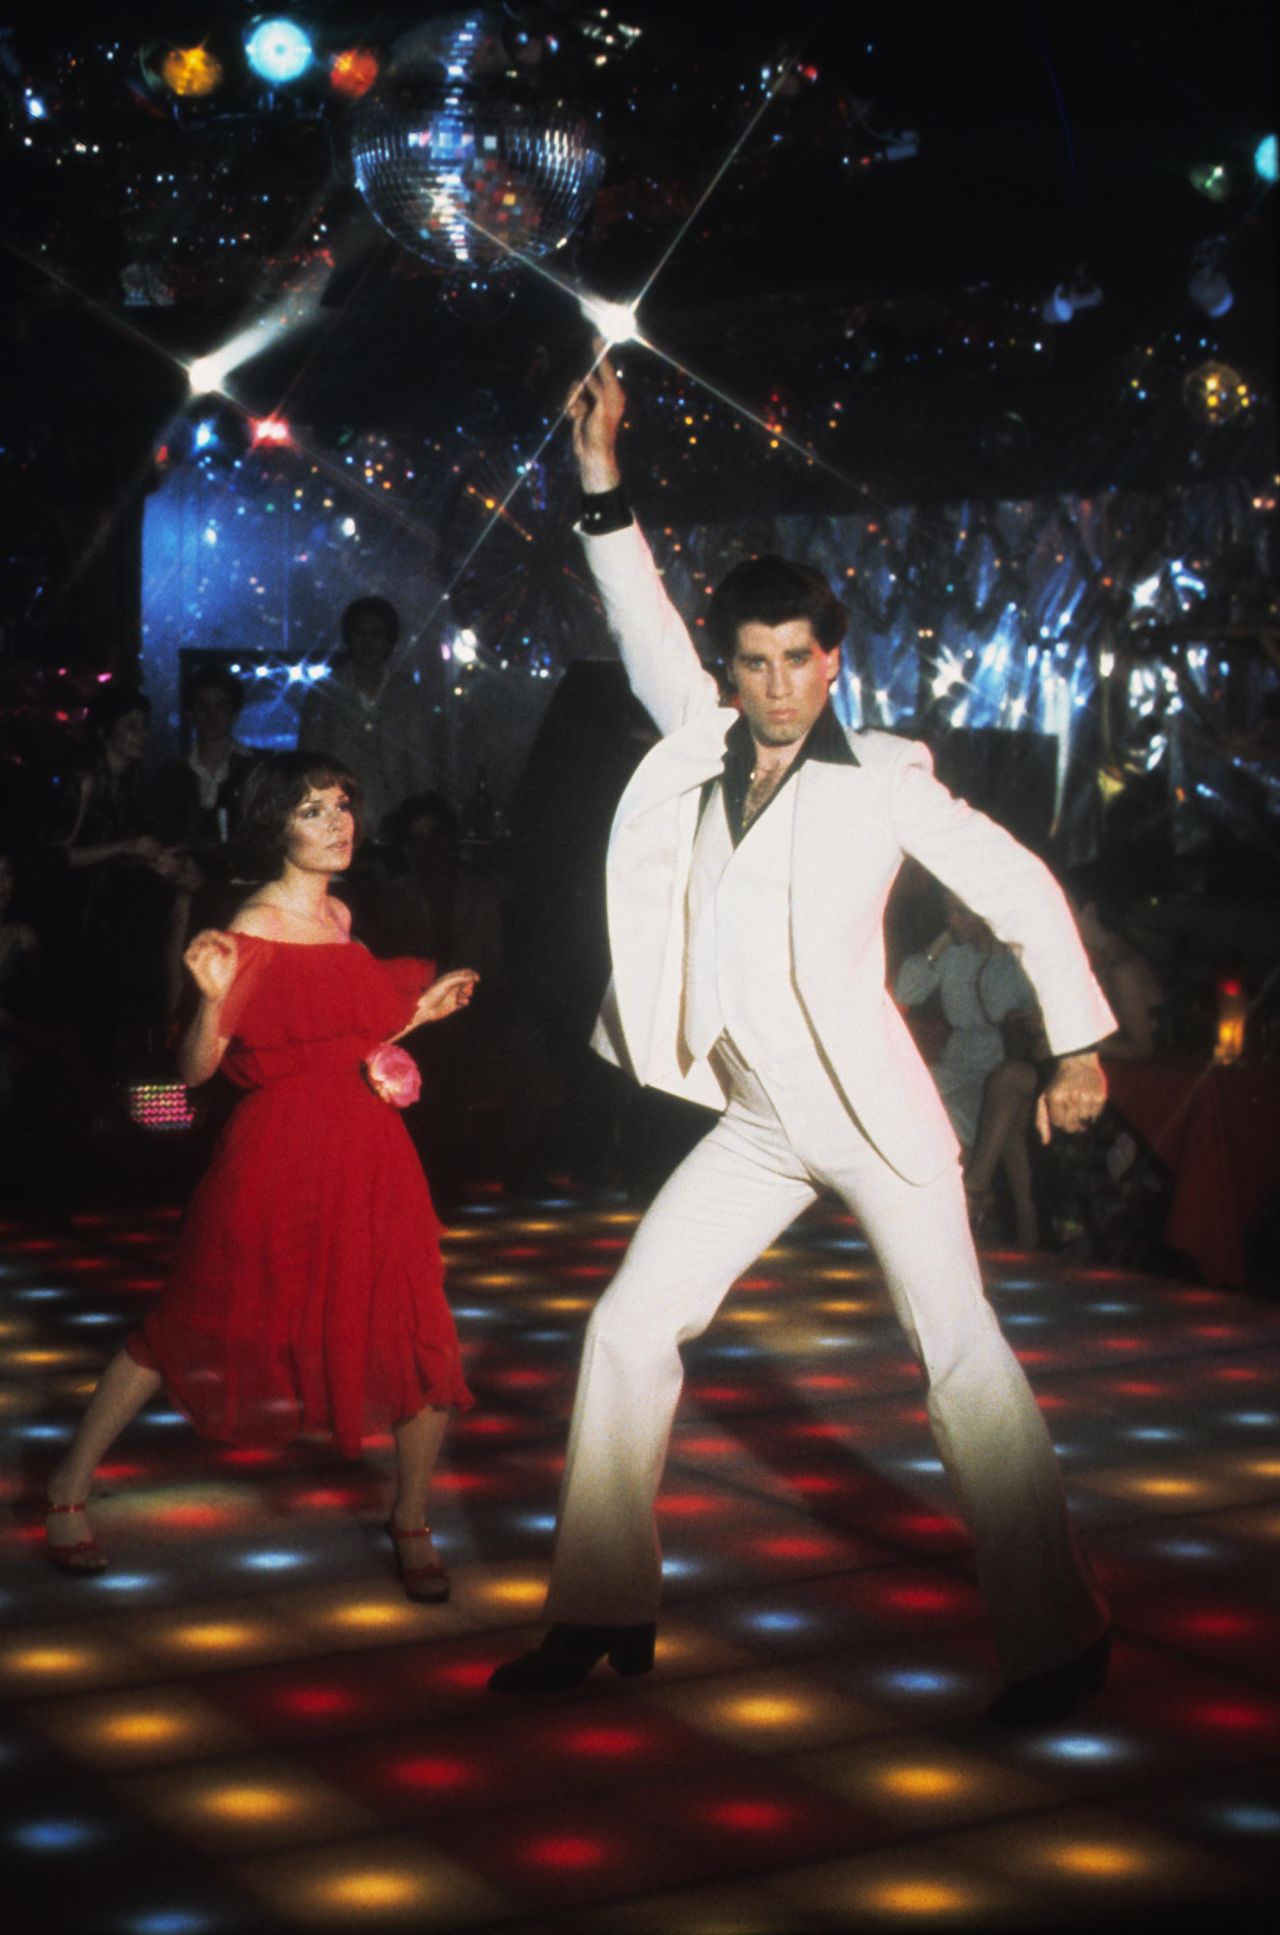 Travolta wore the white suit in the film's famous dance competition scene.